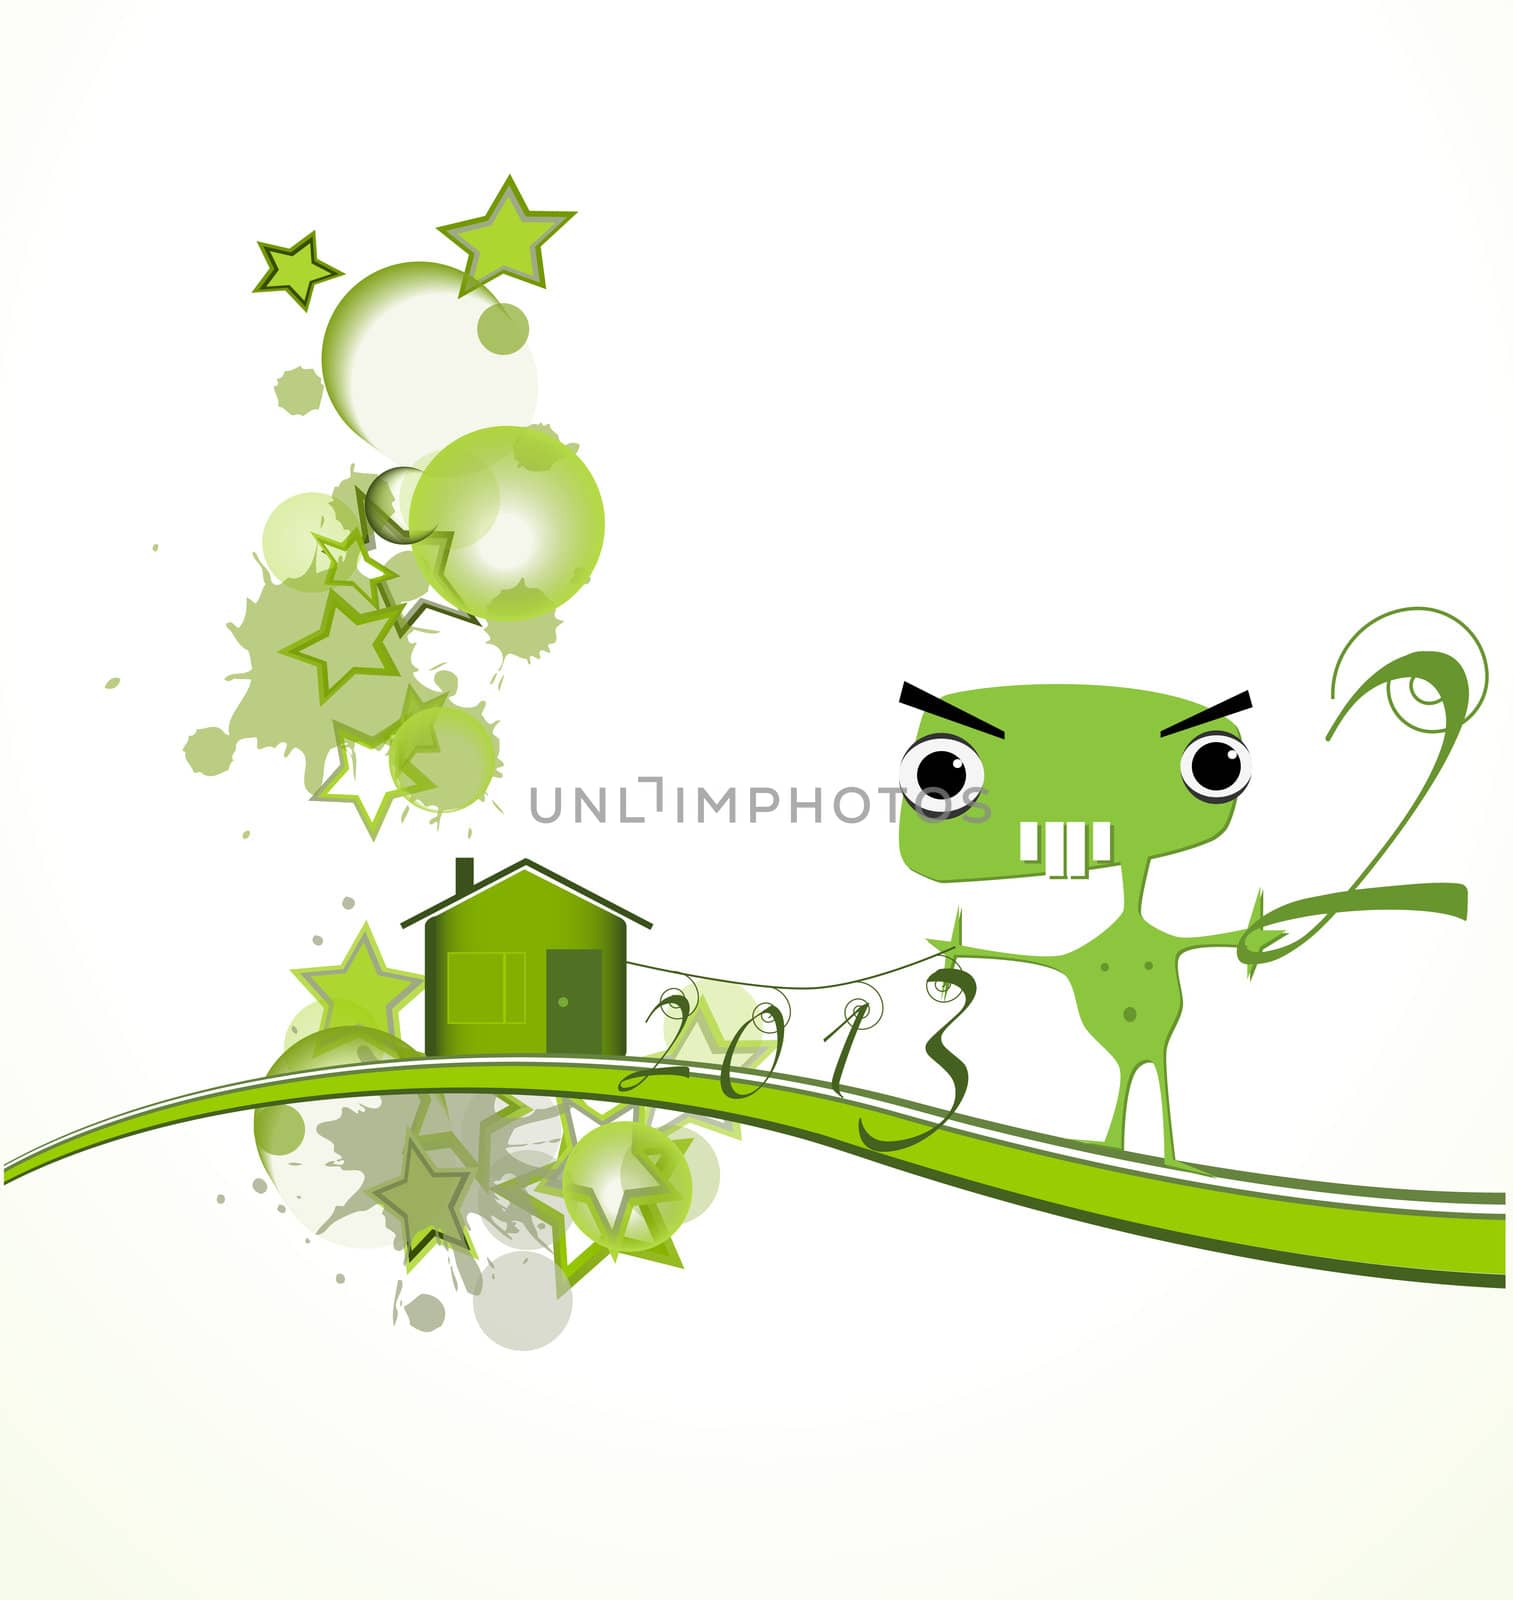 Green house with a monster, vector illustration